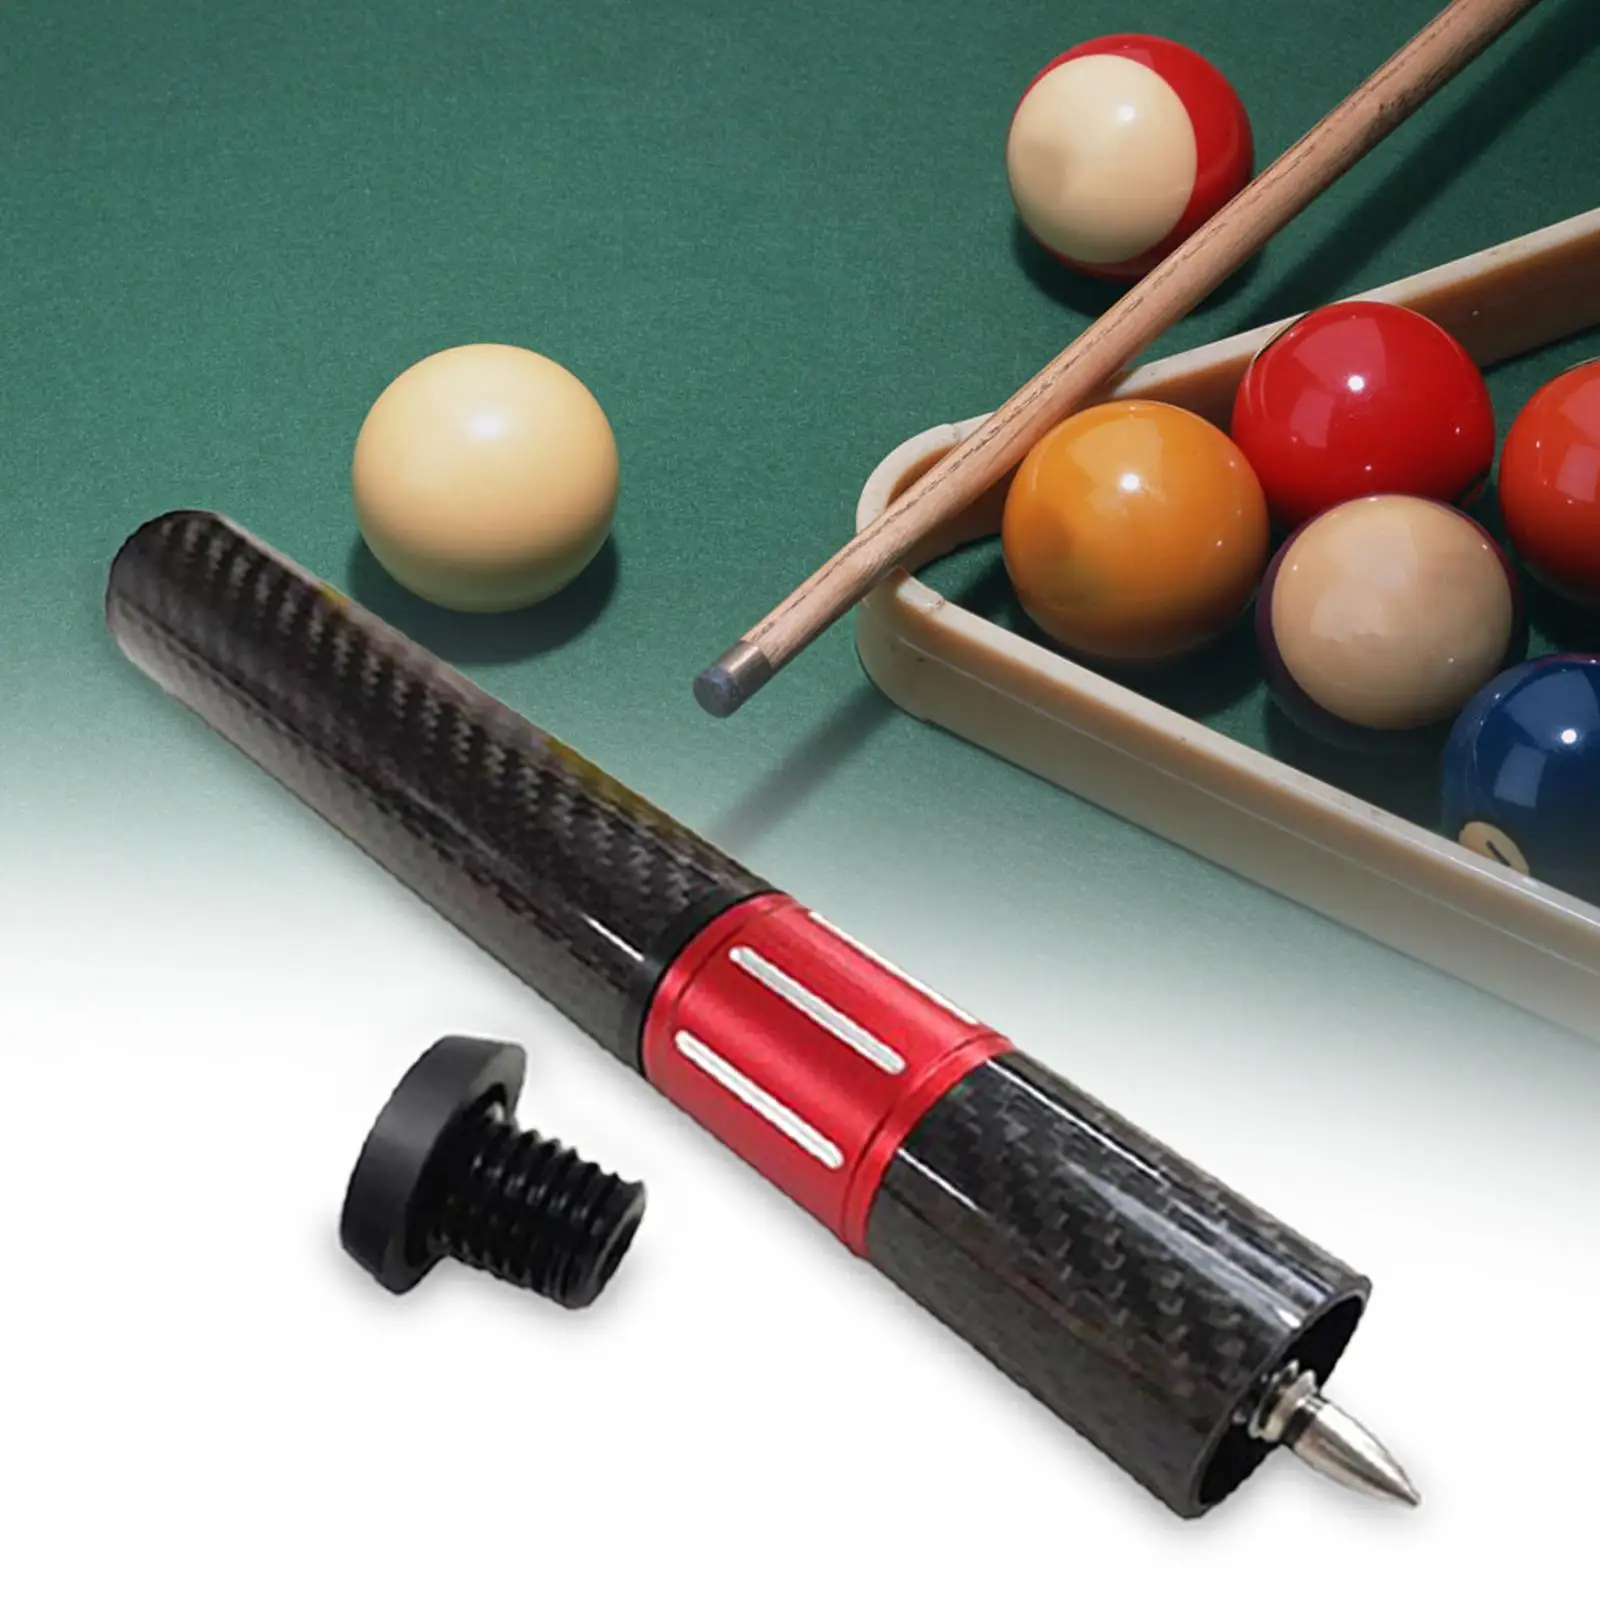 Billiards Pool Cue Extension with Bumper Billiard Holder Cue End Extender Adapter Snooker Cue Stick for Games Training Practice